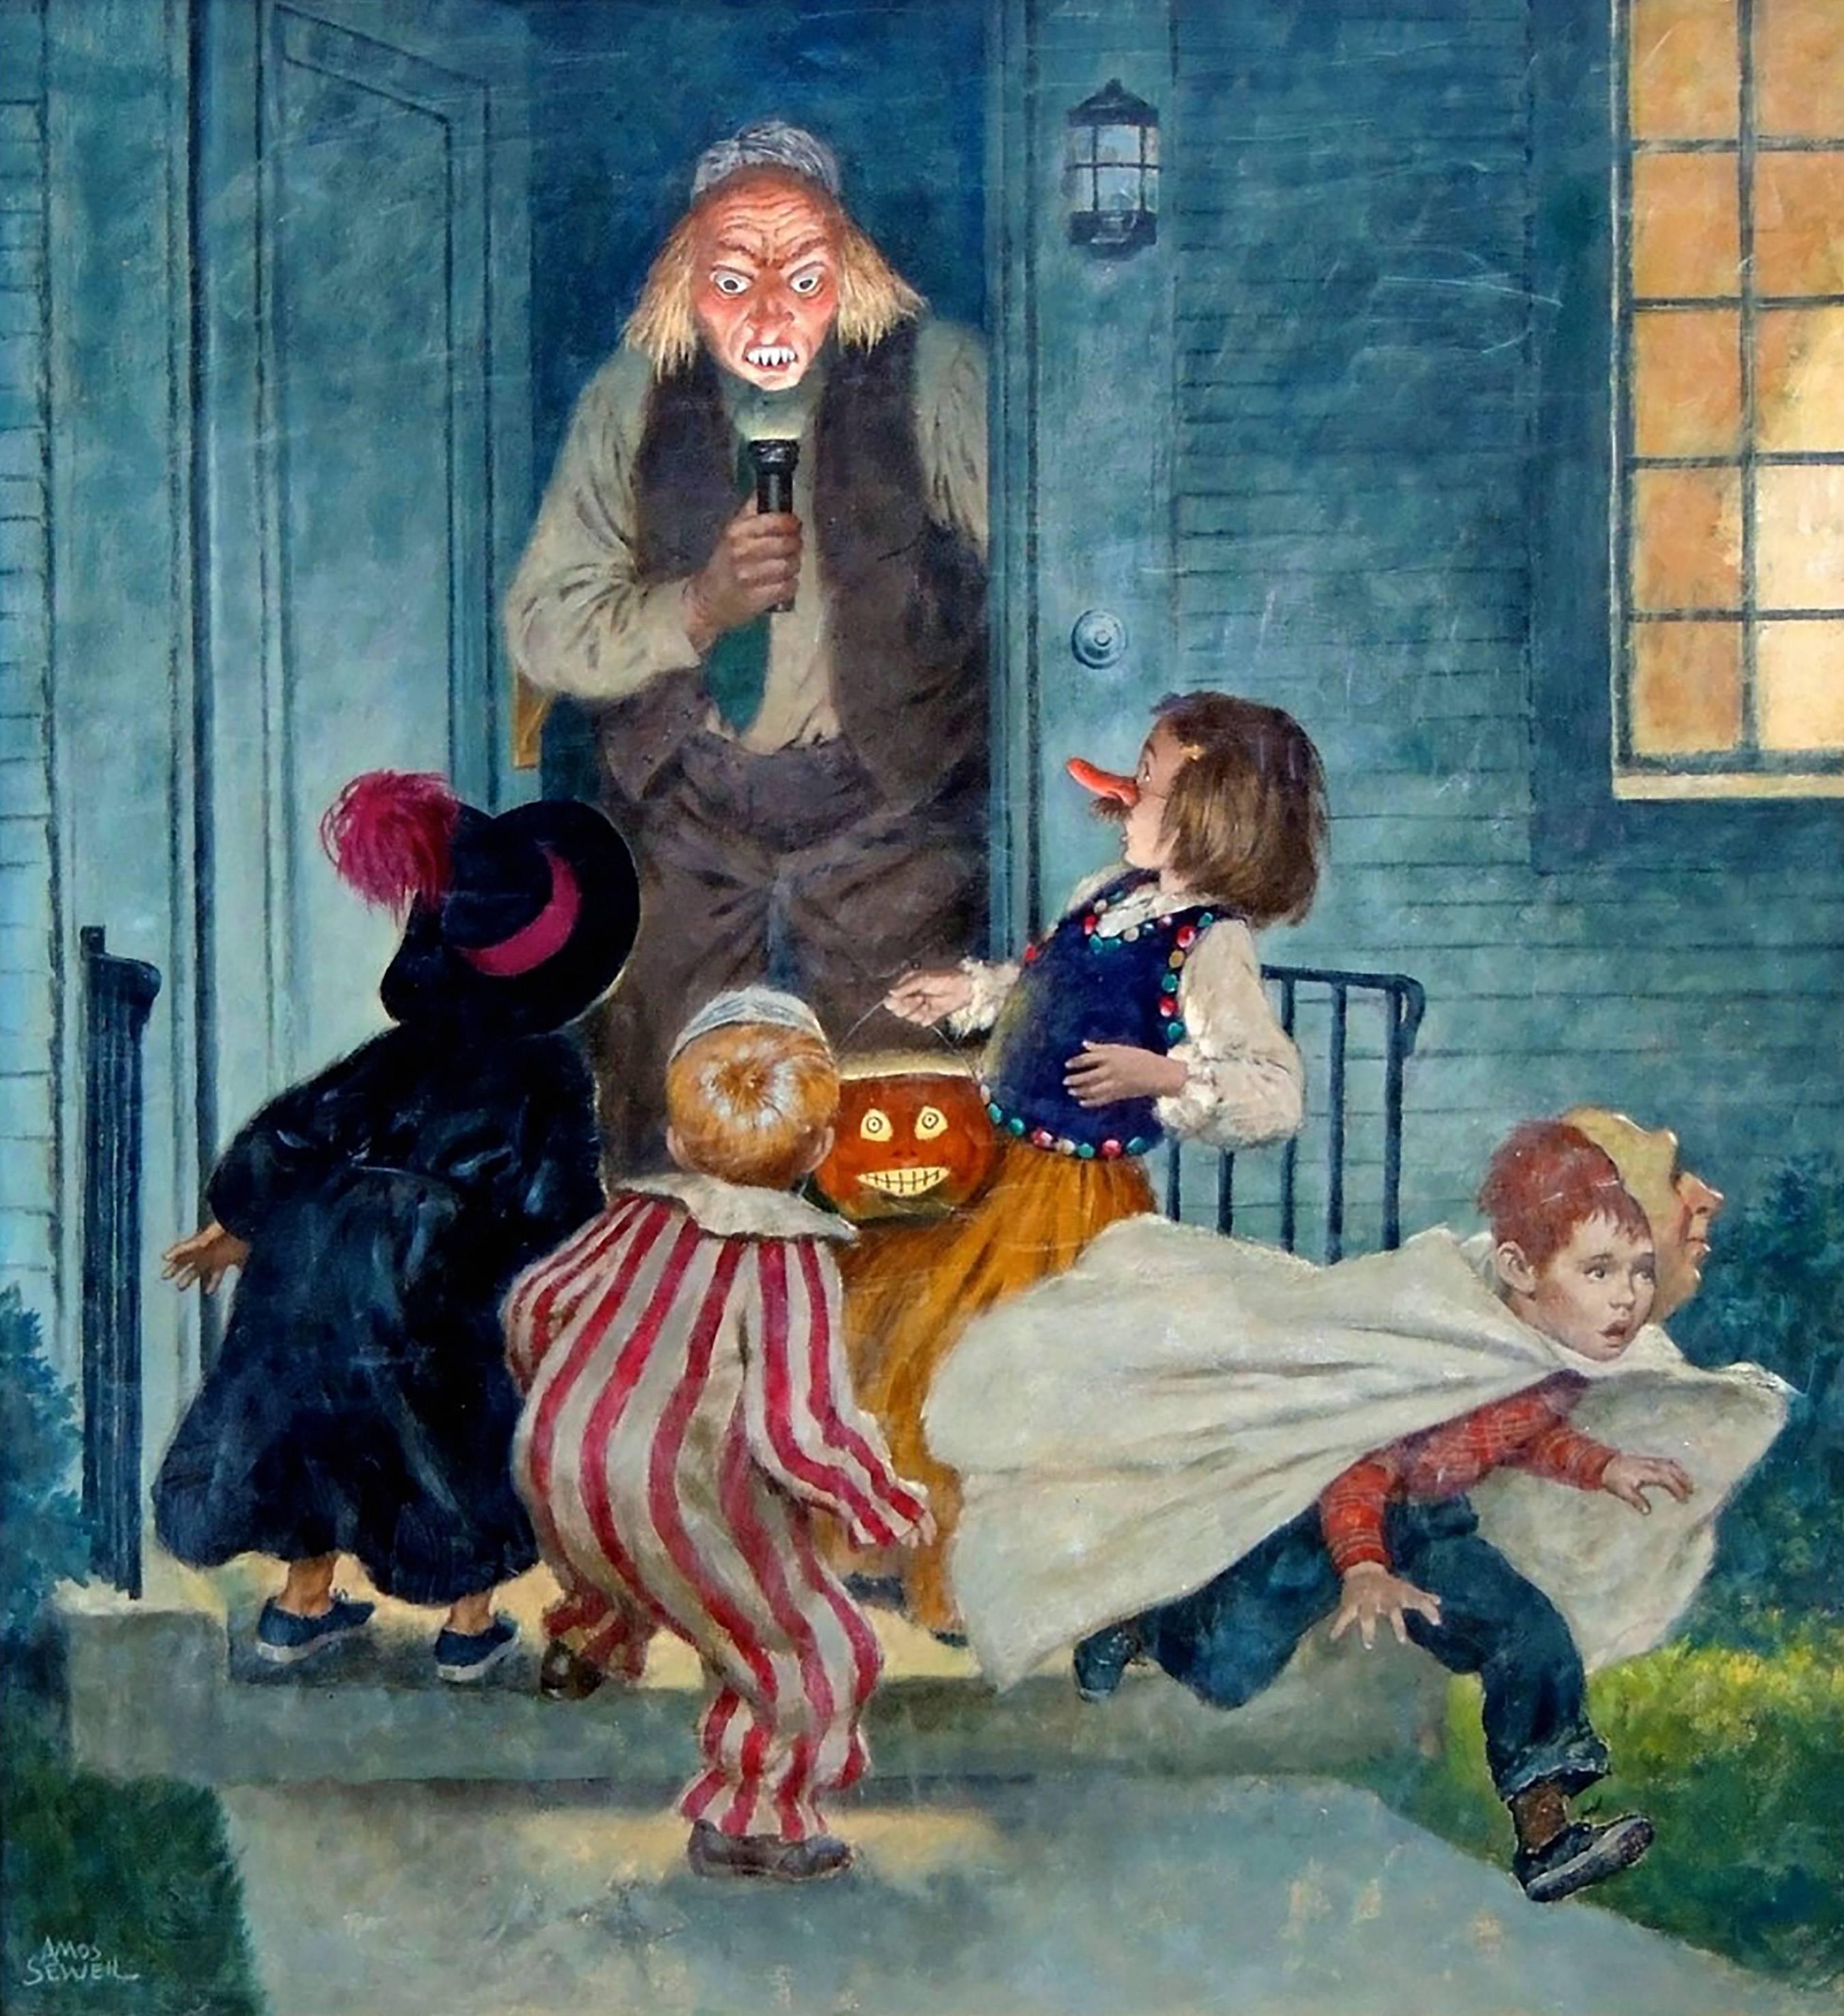 Amos Sewell Figurative Painting - Cover of The Saturday Evening Post, Halloween Edition